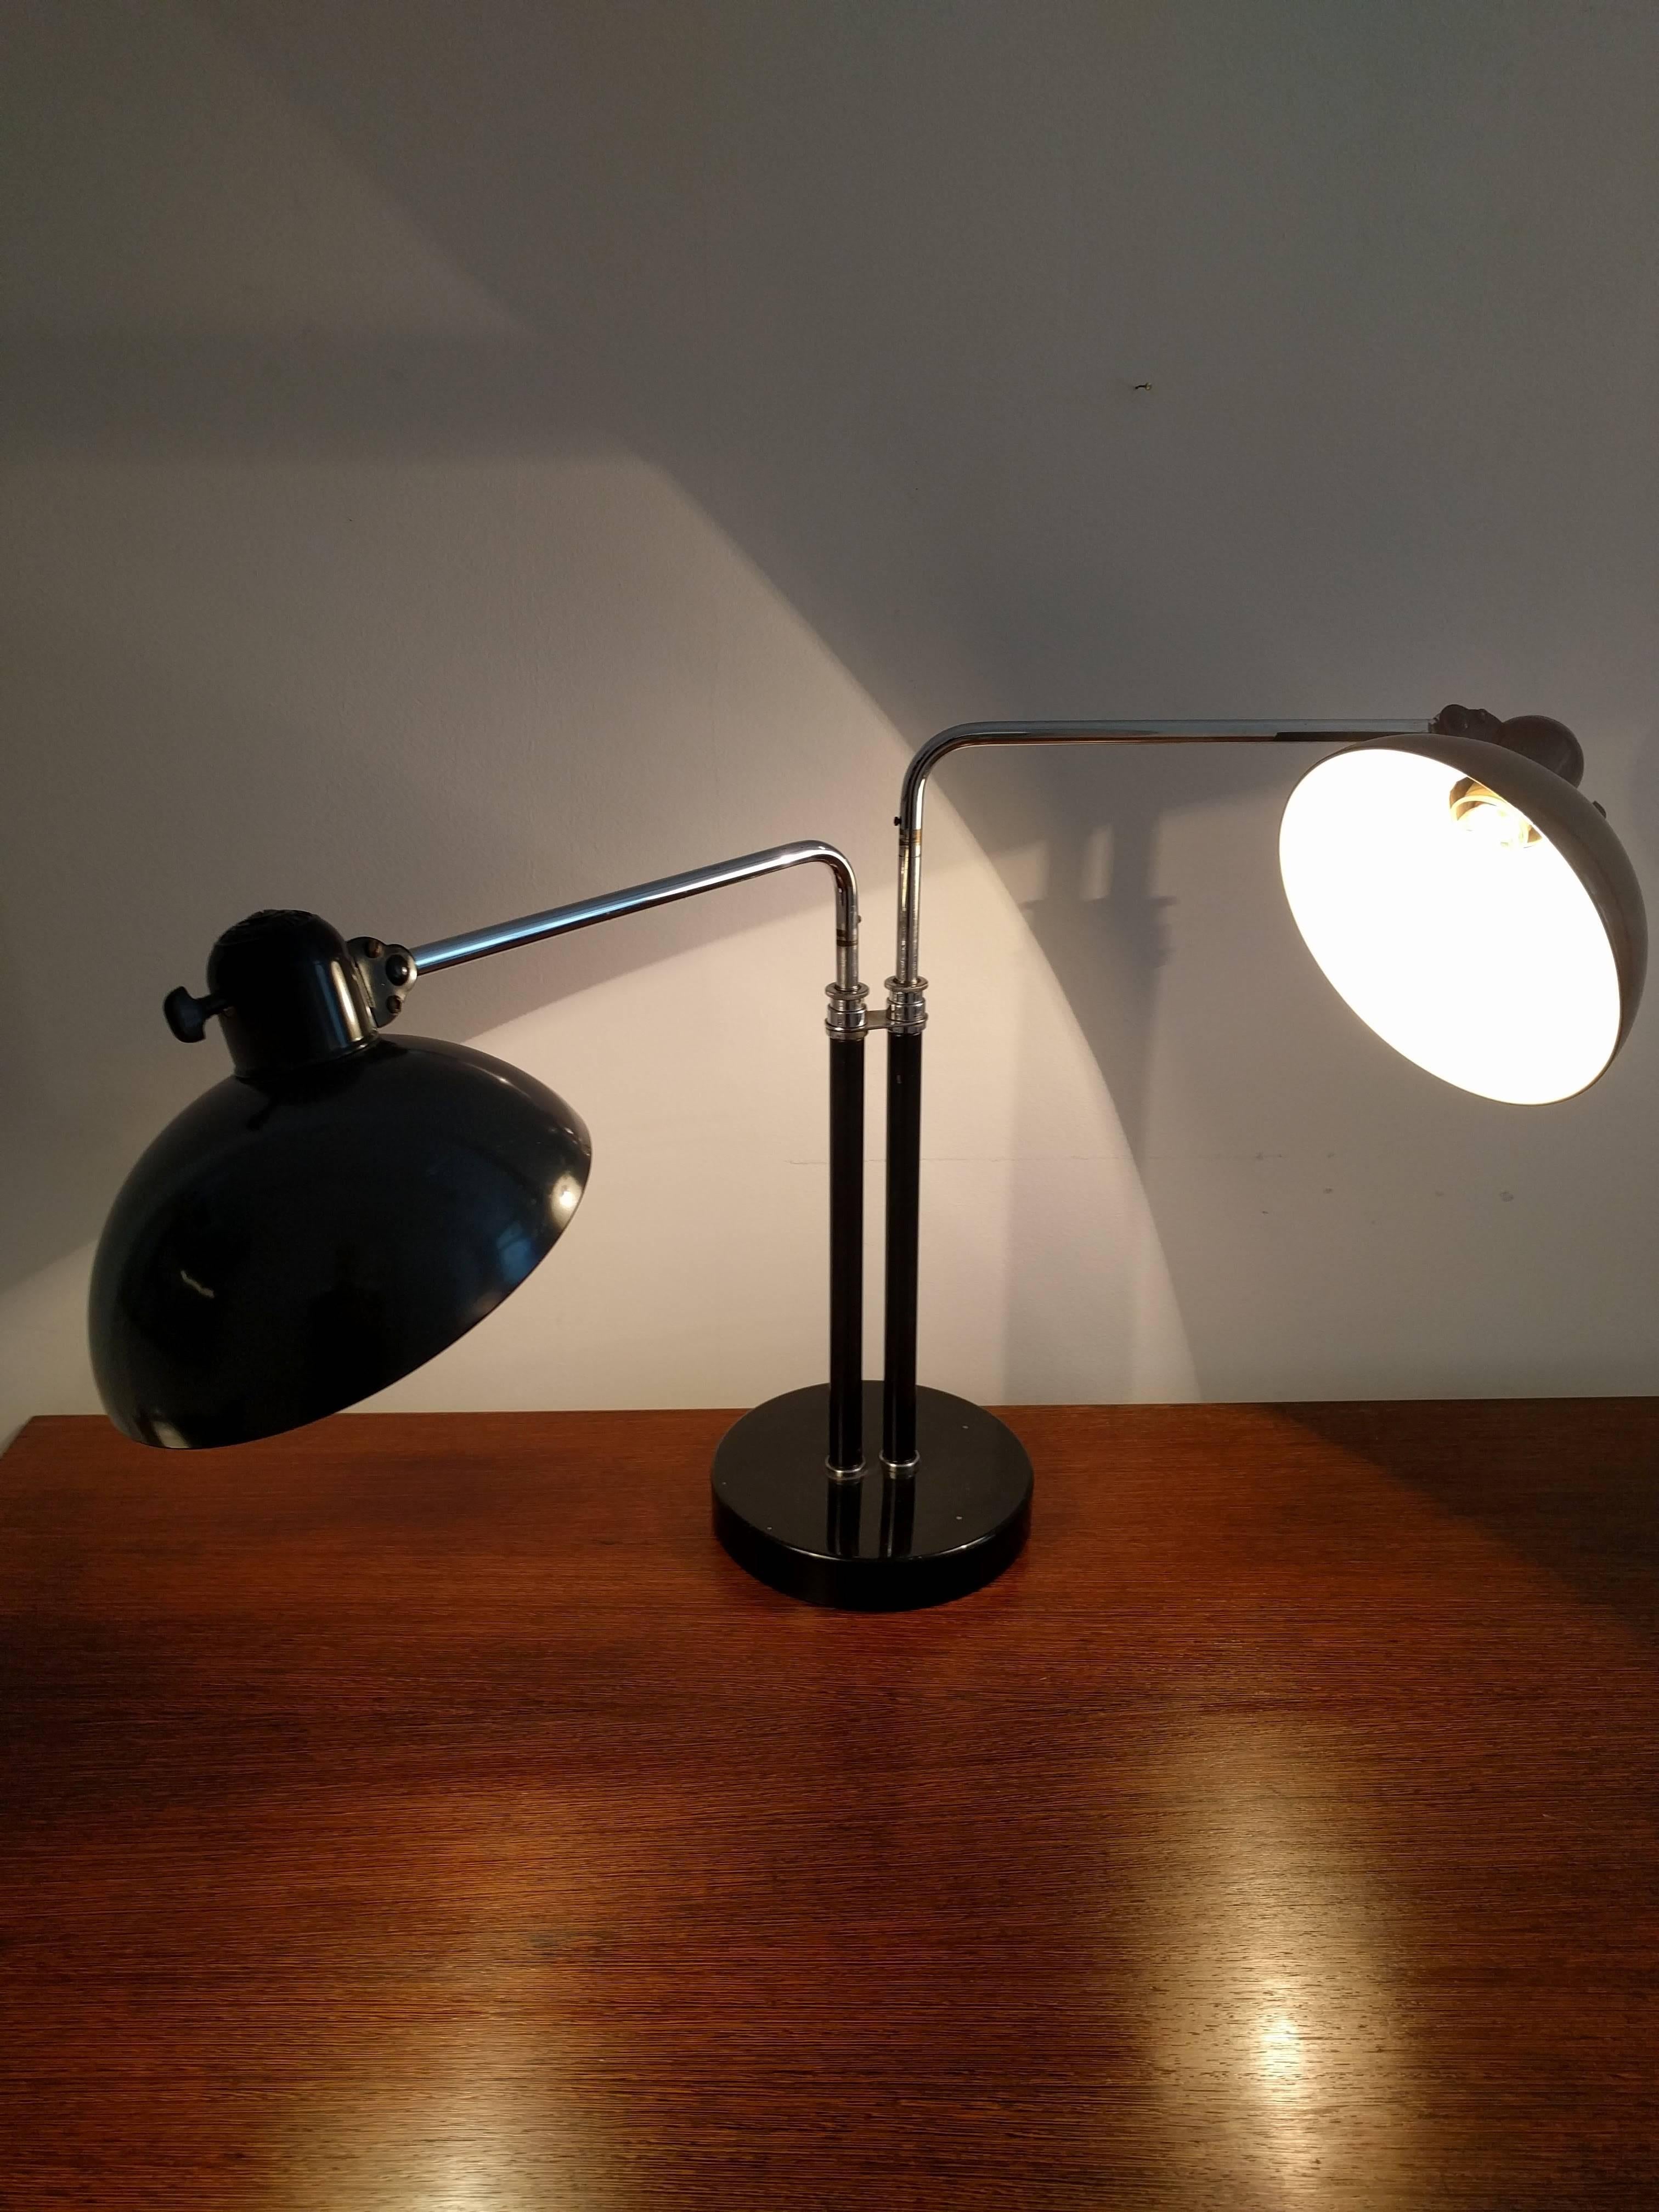 This table lamp was designed by Christian Dell and produced by Kaiser Idell in the 1930s. It is made from chromed steel and black sheet metal. The lamp features two lamp shades and is still in its original condition.